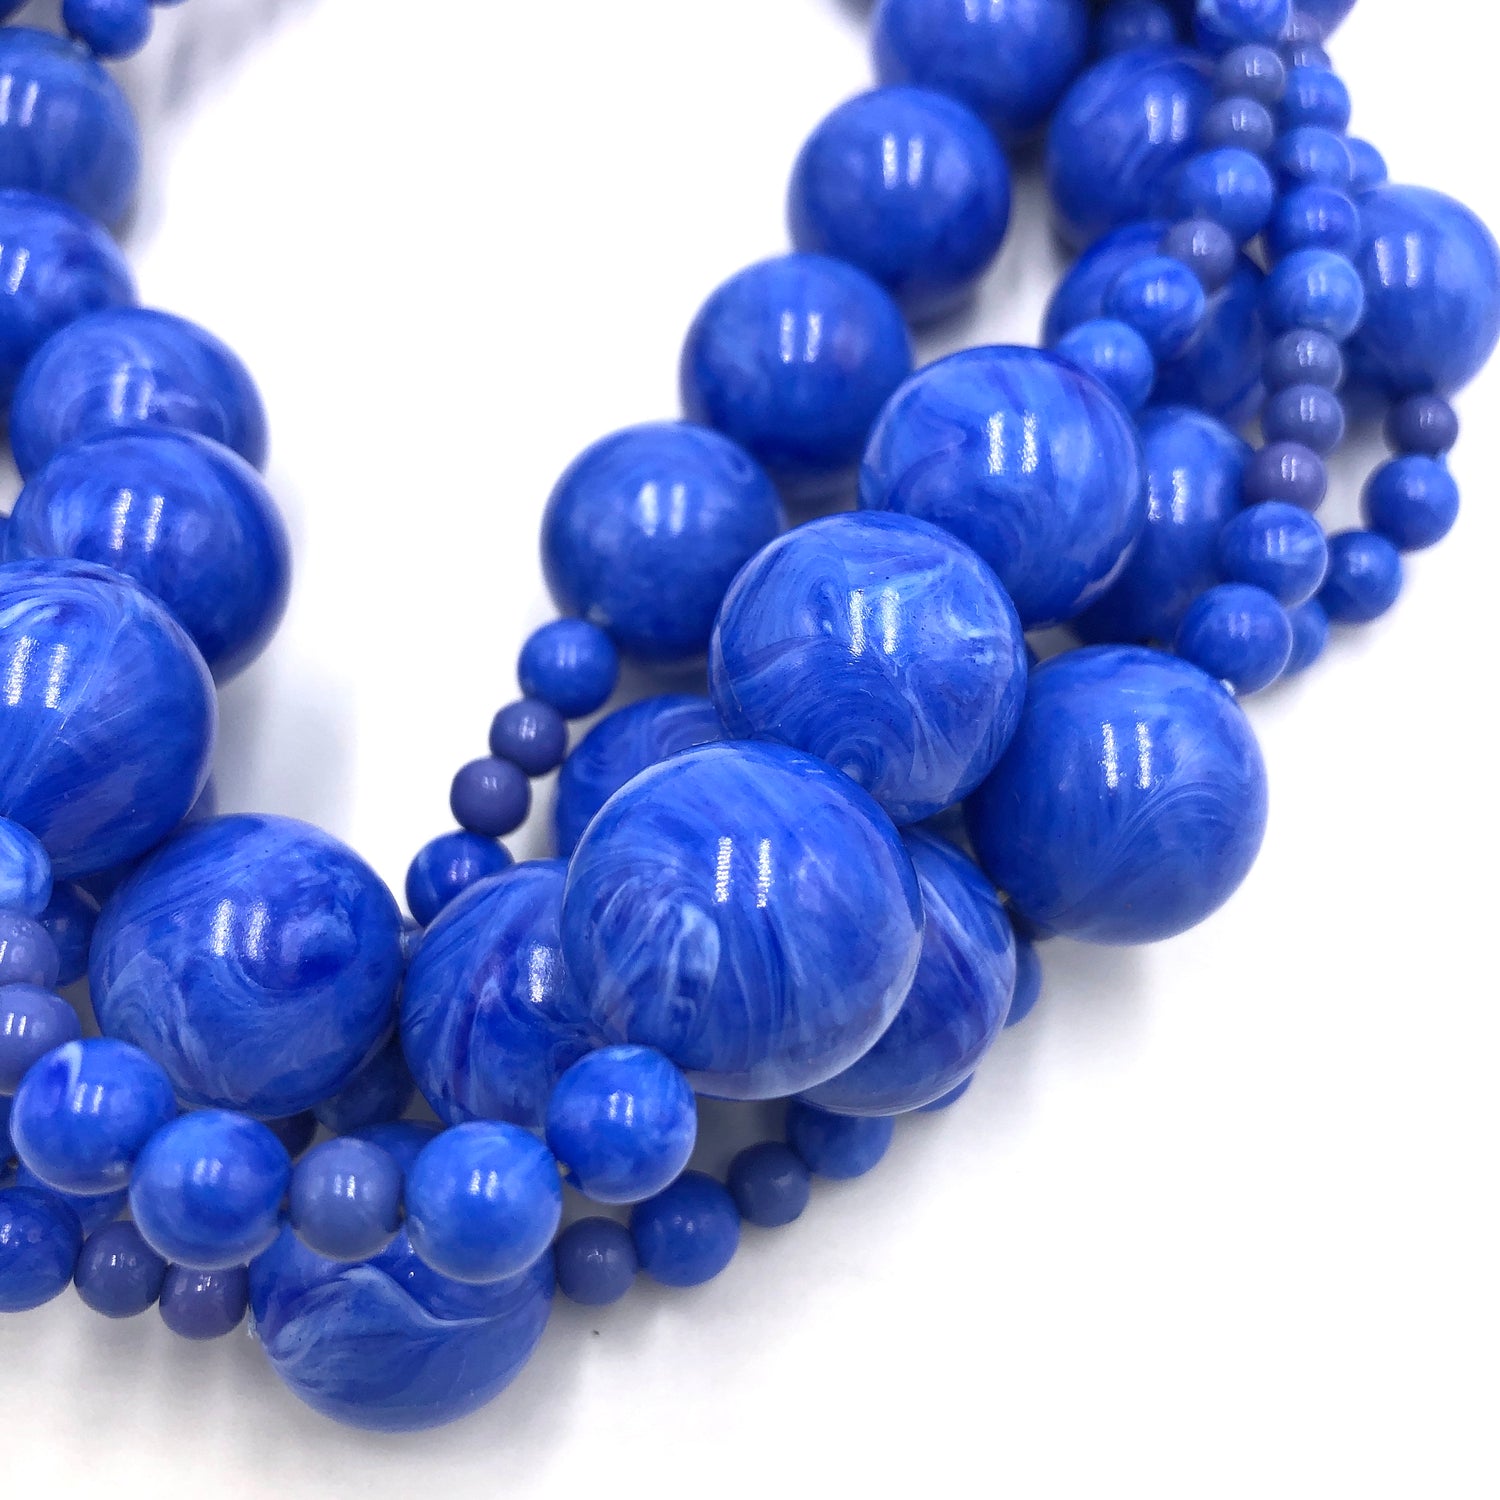 Marbled Blues Sylvie Beaded Necklace